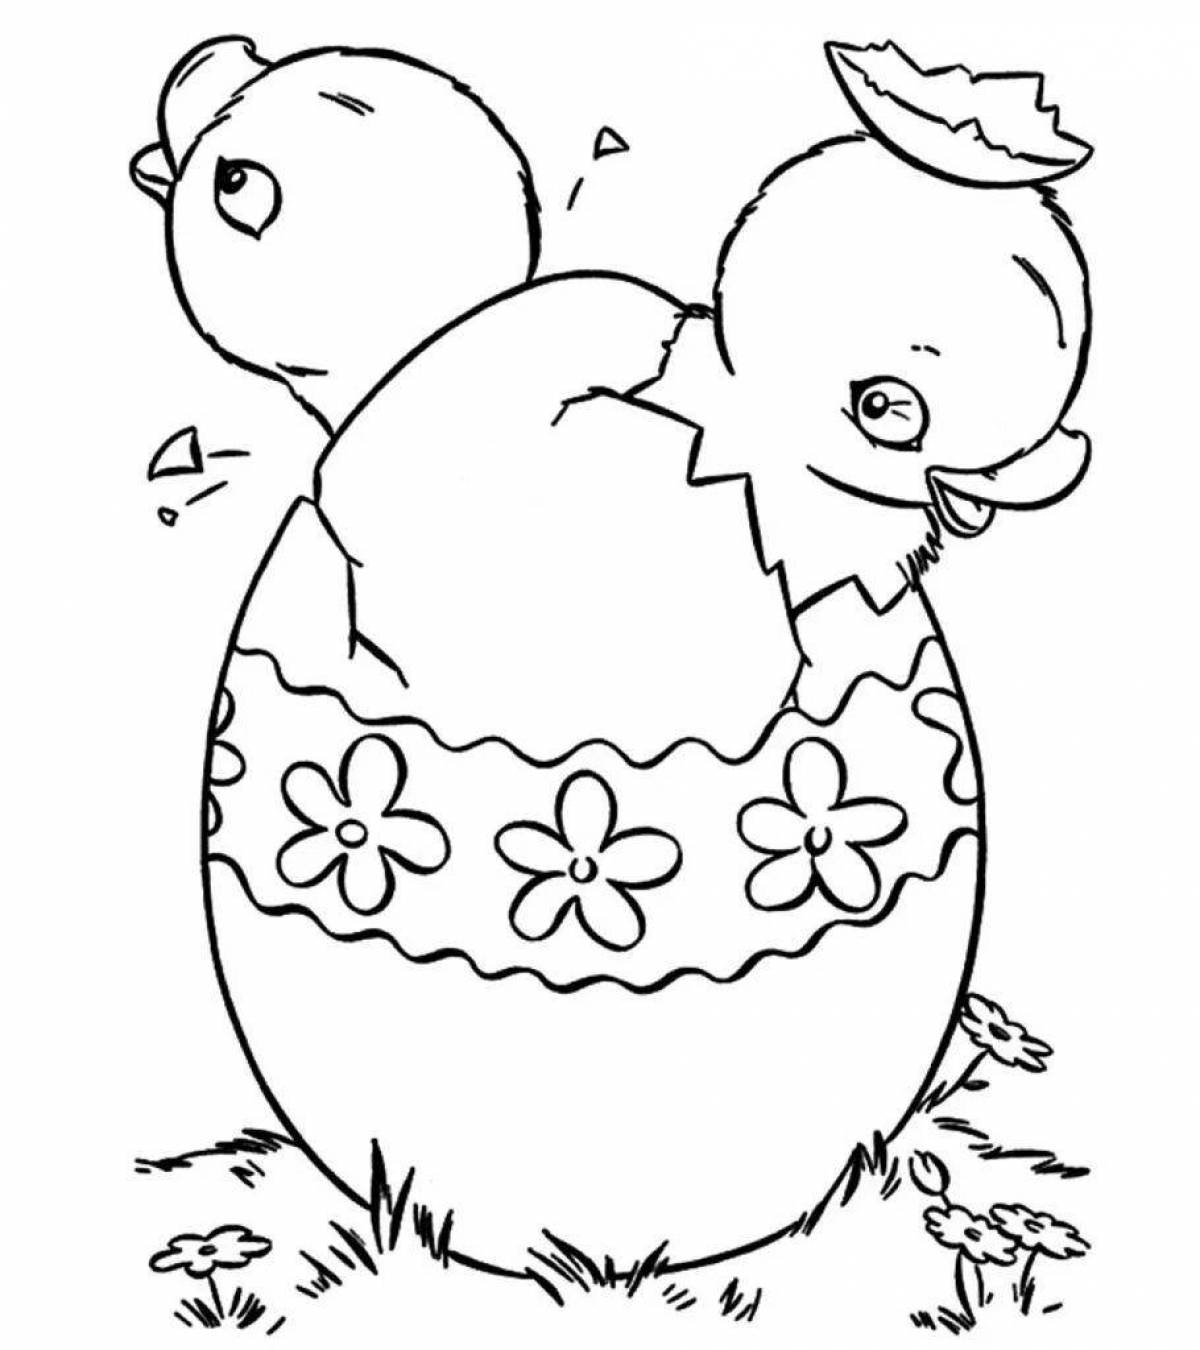 Coloring book shiny chicken in shell